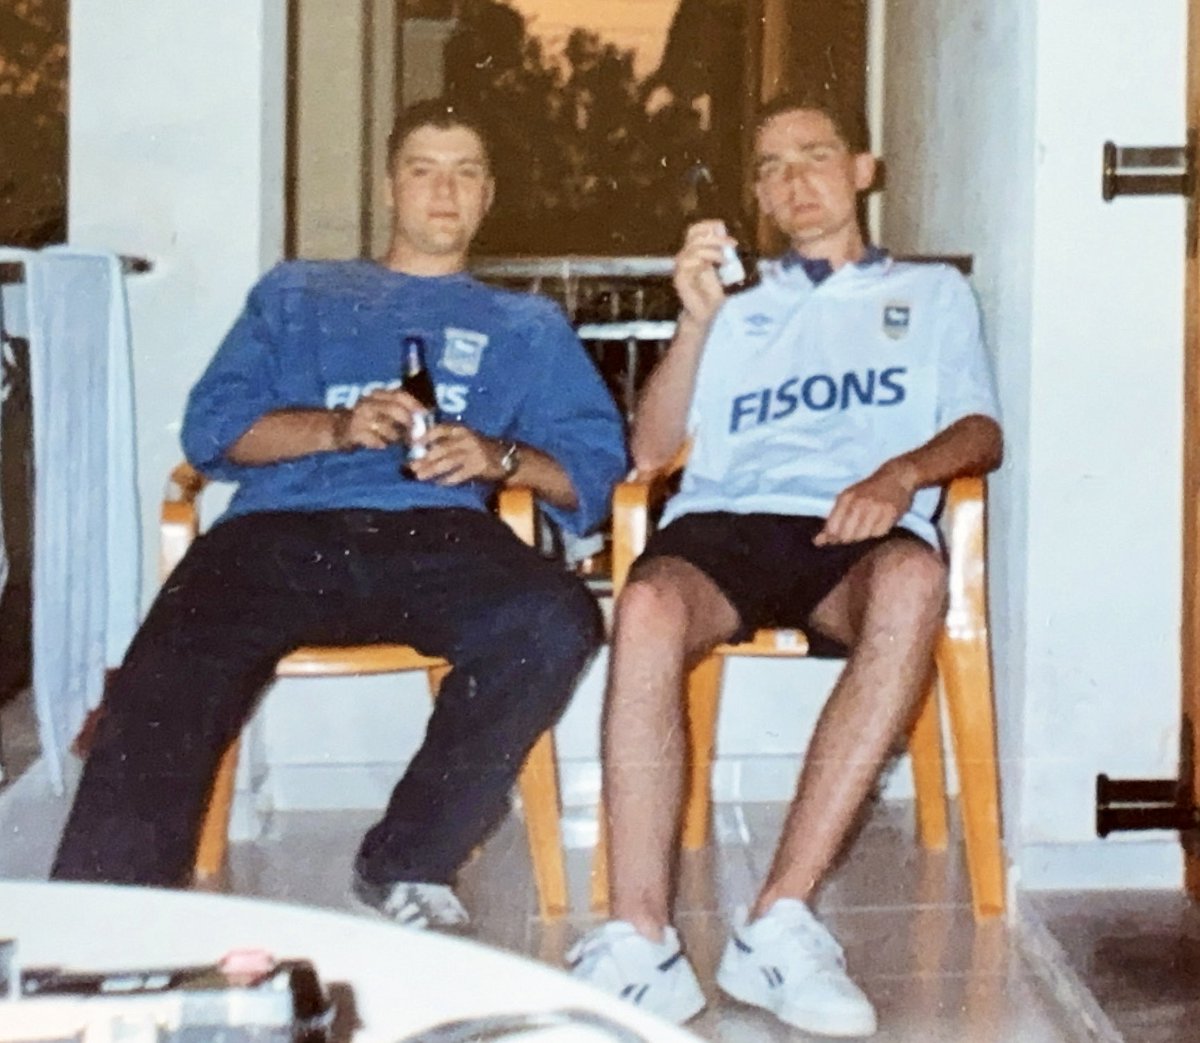 Corfu early 90s. I’ve no recollection whatsoever of owning that beautiful white Ipswich away shirt. Should have kept it! #itfc